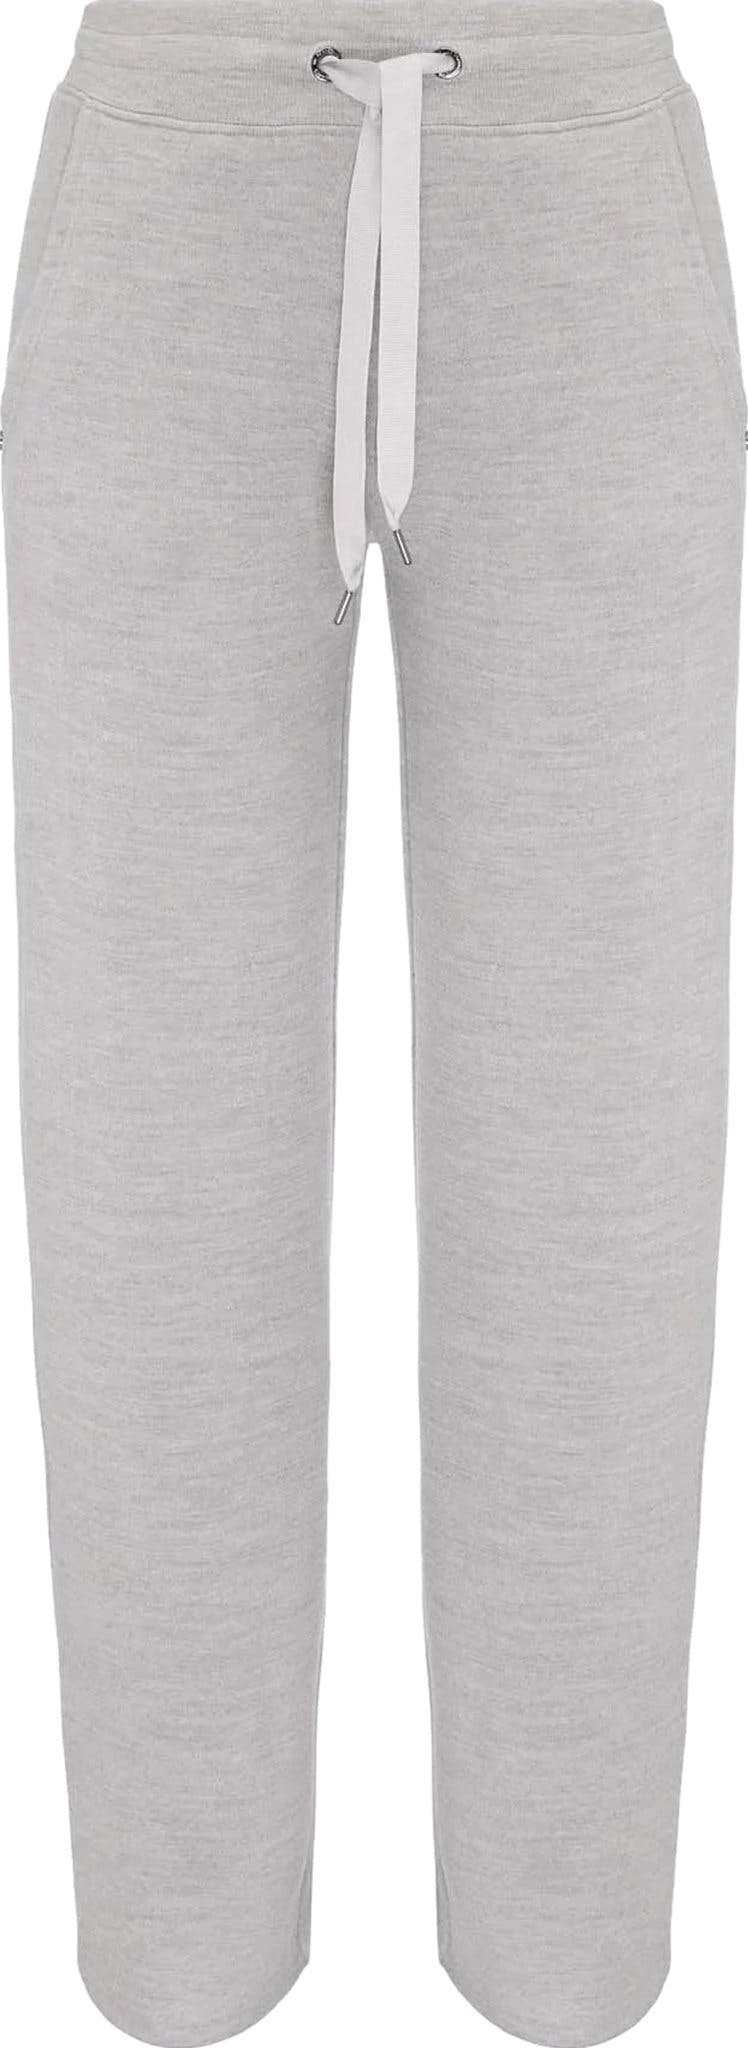 Product image for Tind Pants - Women's